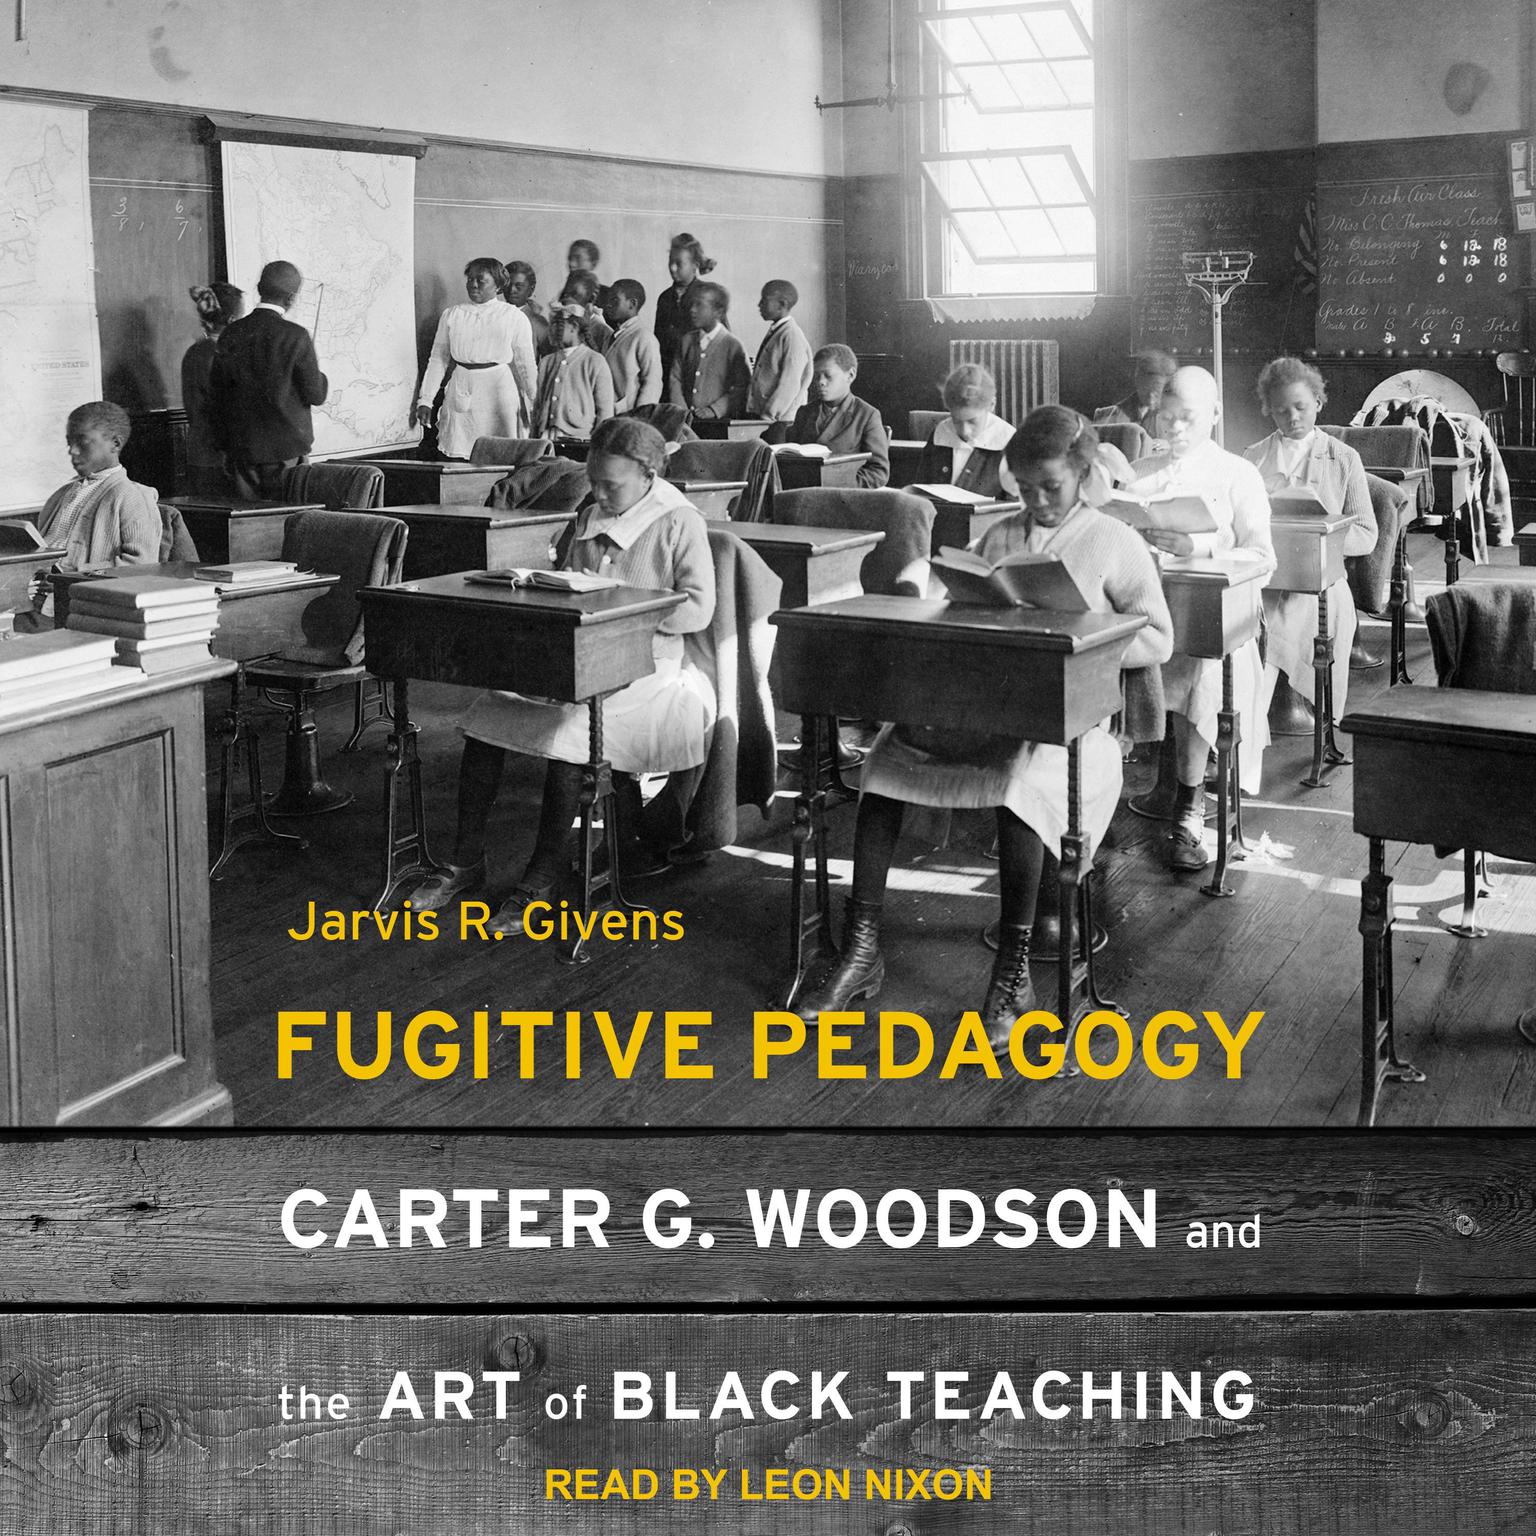 Fugitive Pedagogy: Carter G. Woodson and the Art of Black Teaching Audiobook, by Jarvis R. Givens